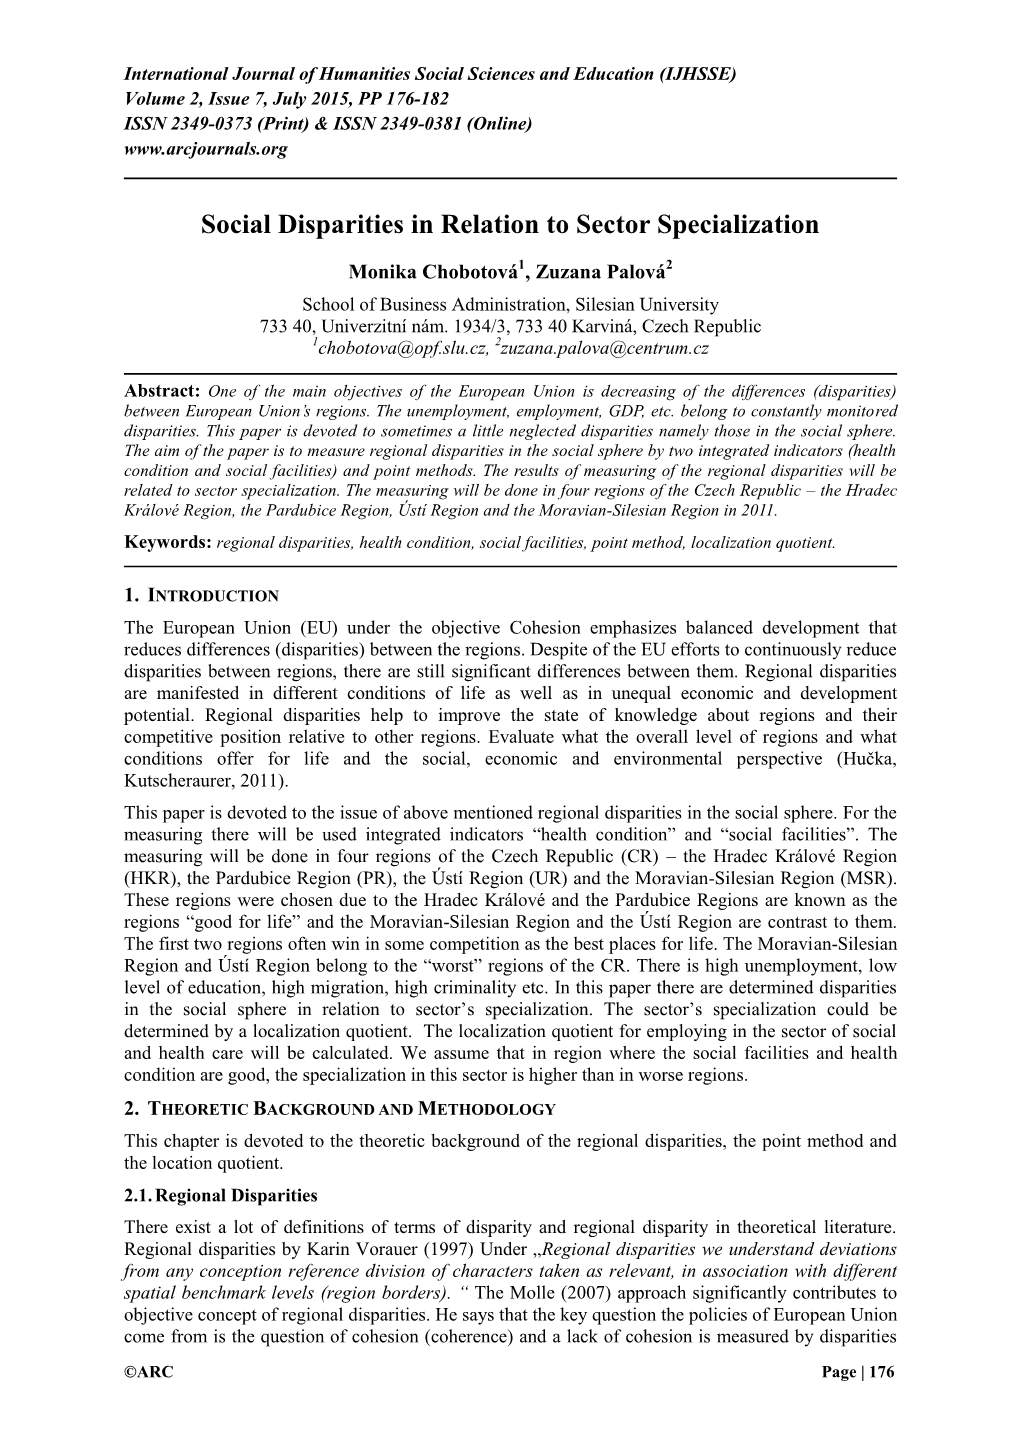 Social Disparities in Relation to Sector Specialization